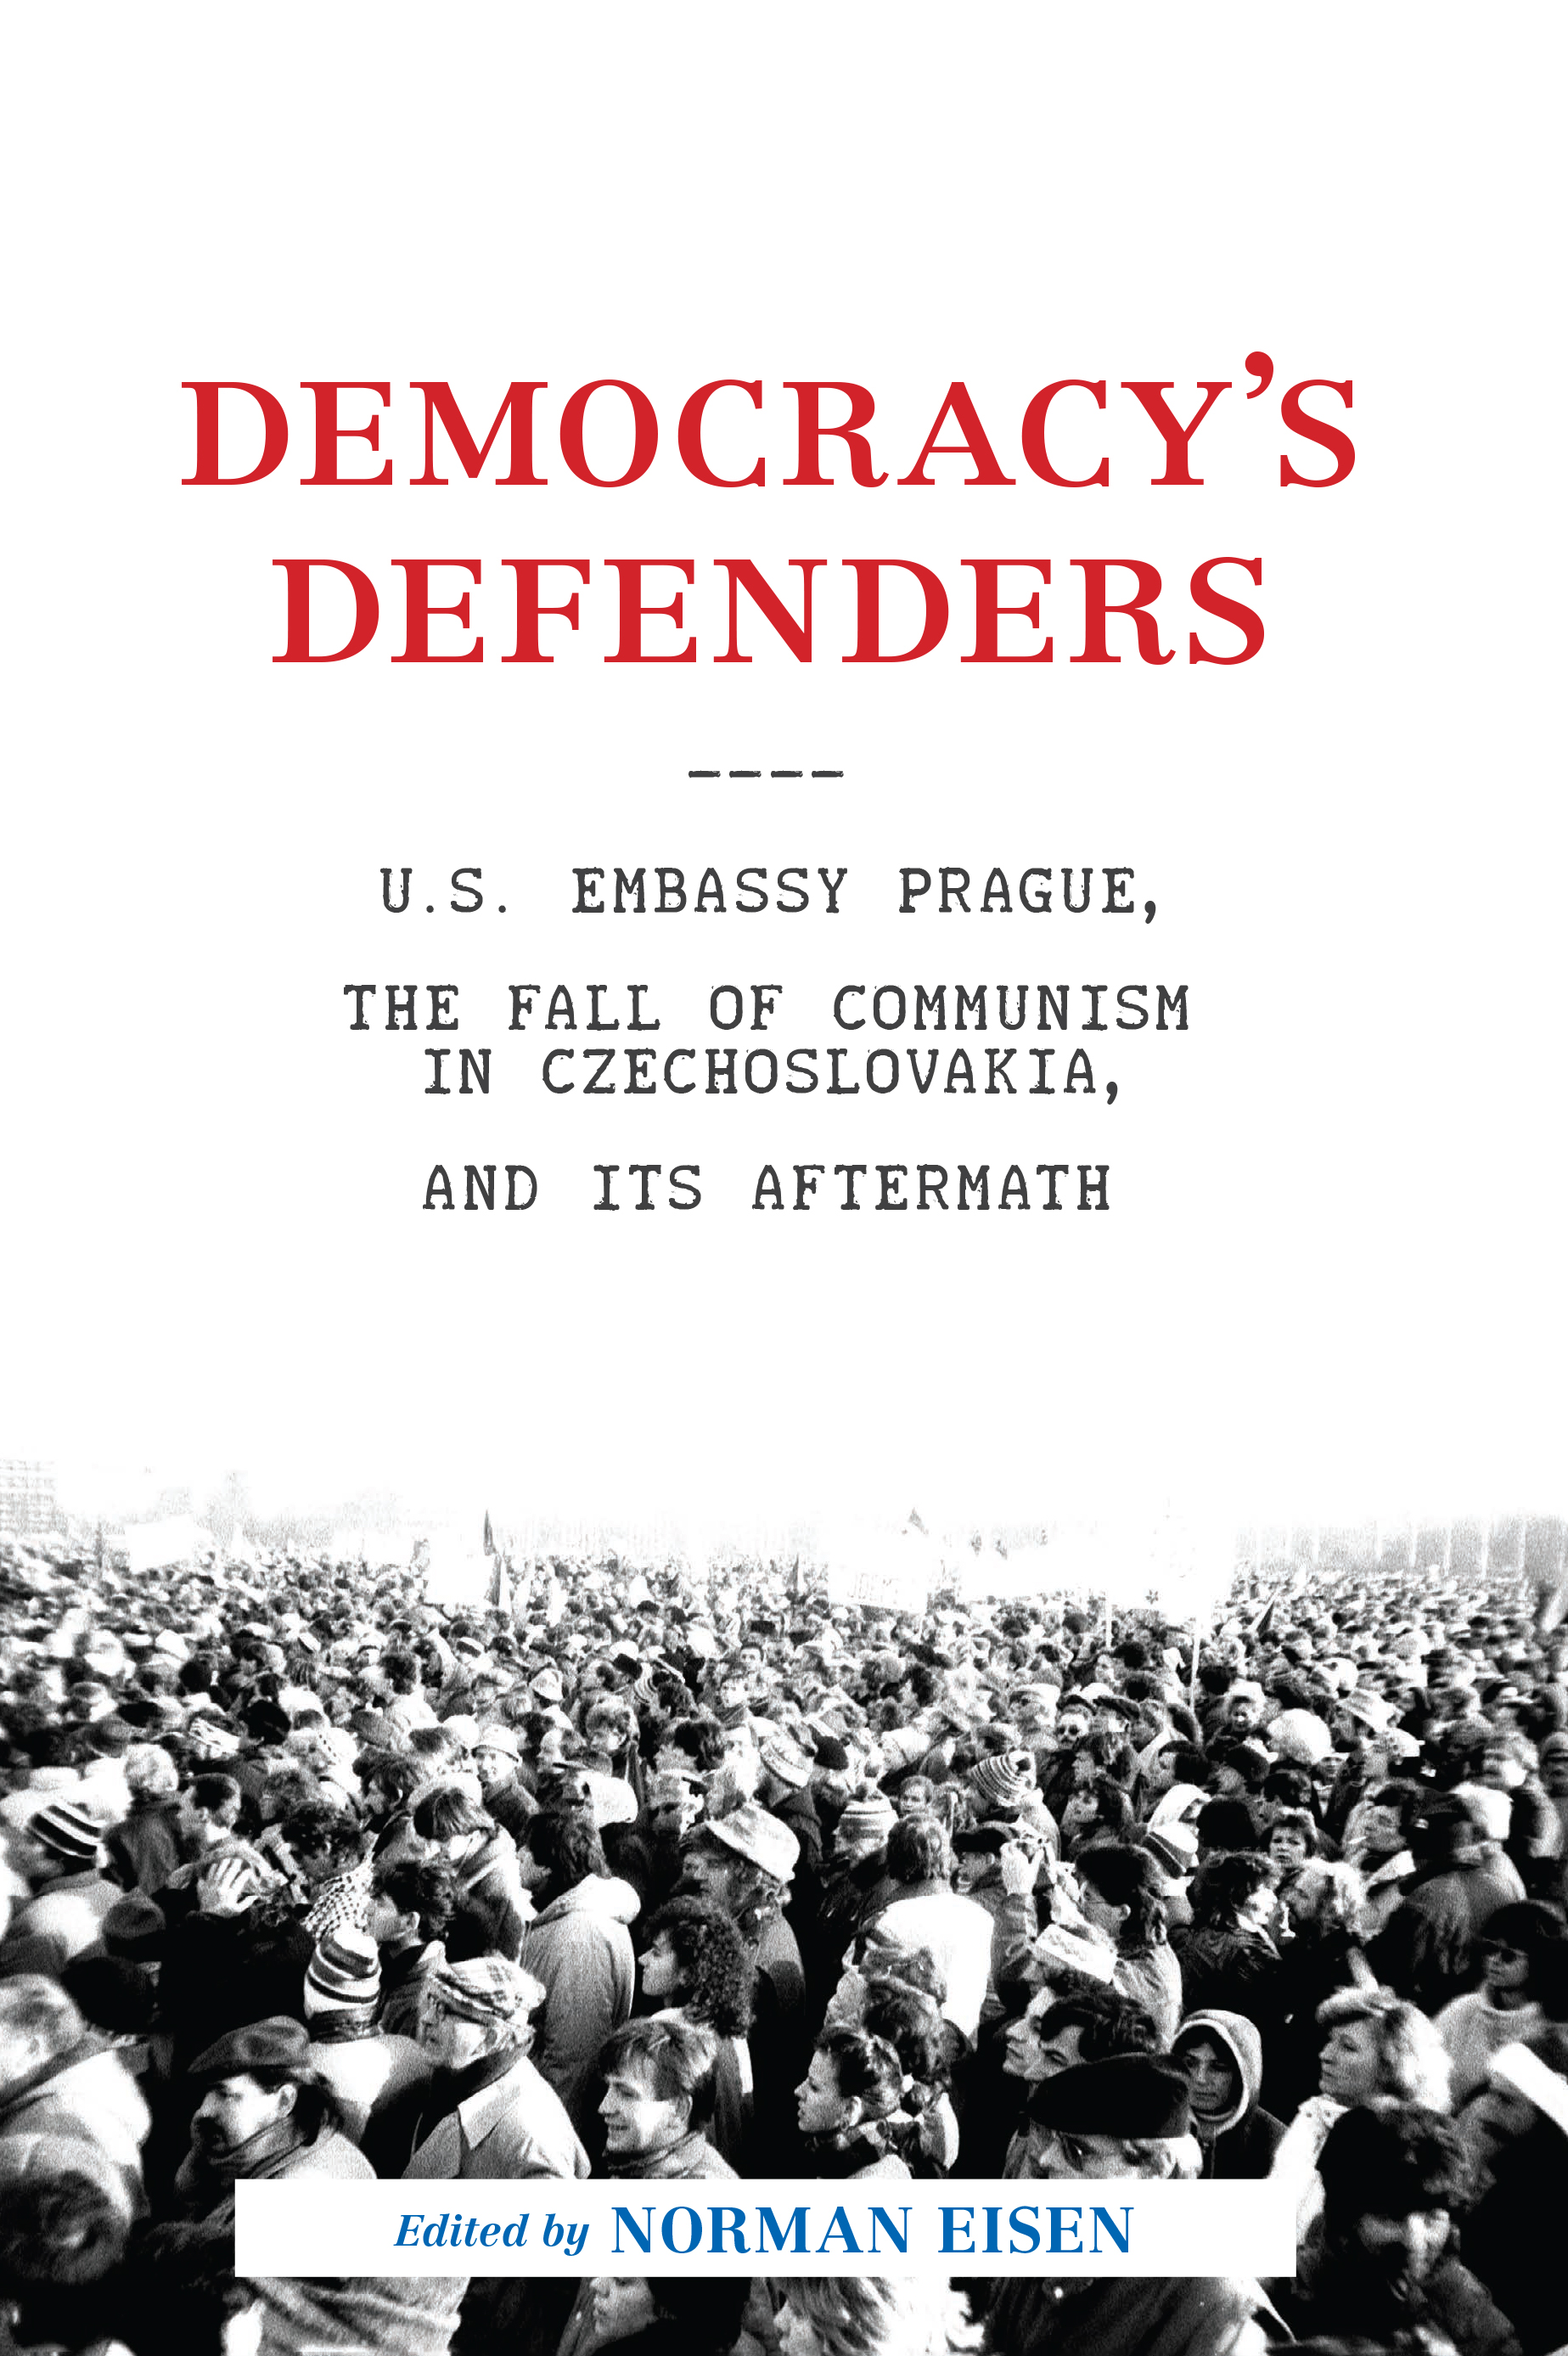 Democracy's Defenders: U.S. Embassy Prague, the Fall of Communism in Czechoslovakia, and Its Aftermath